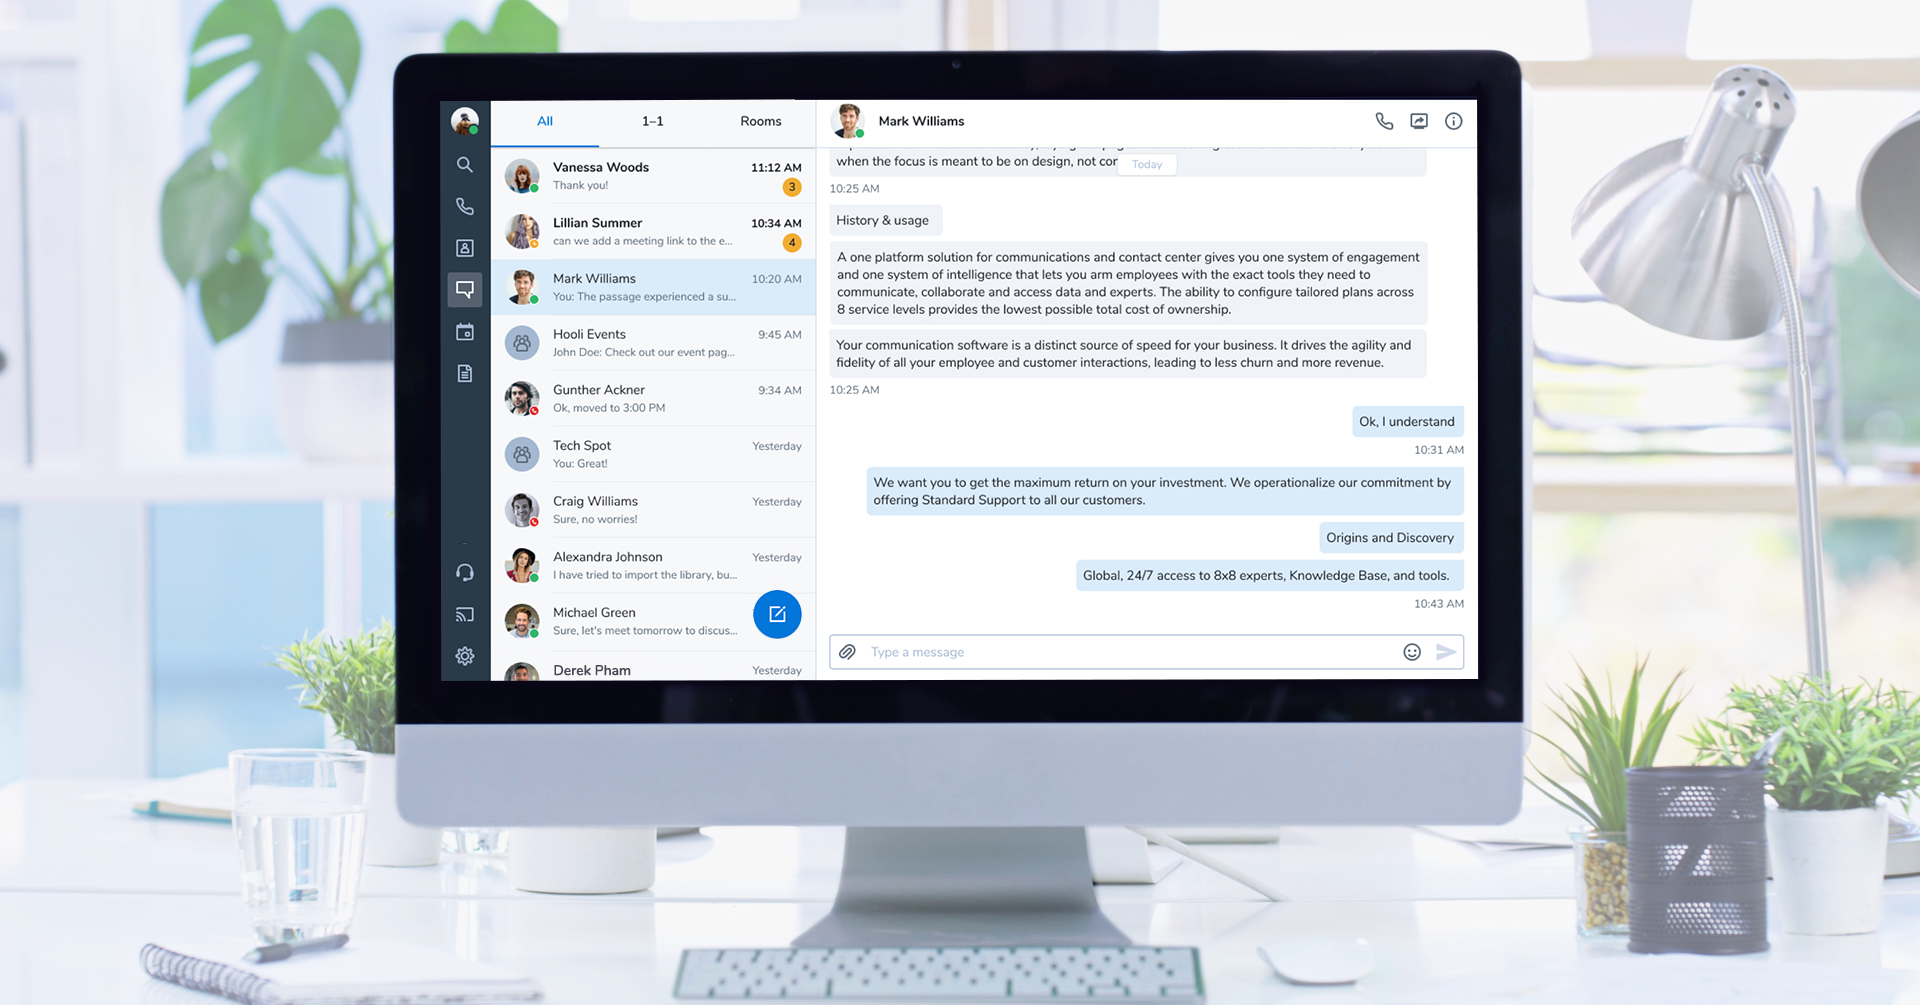 8x8 Work App chat and conversation screen displayed on a desktop.